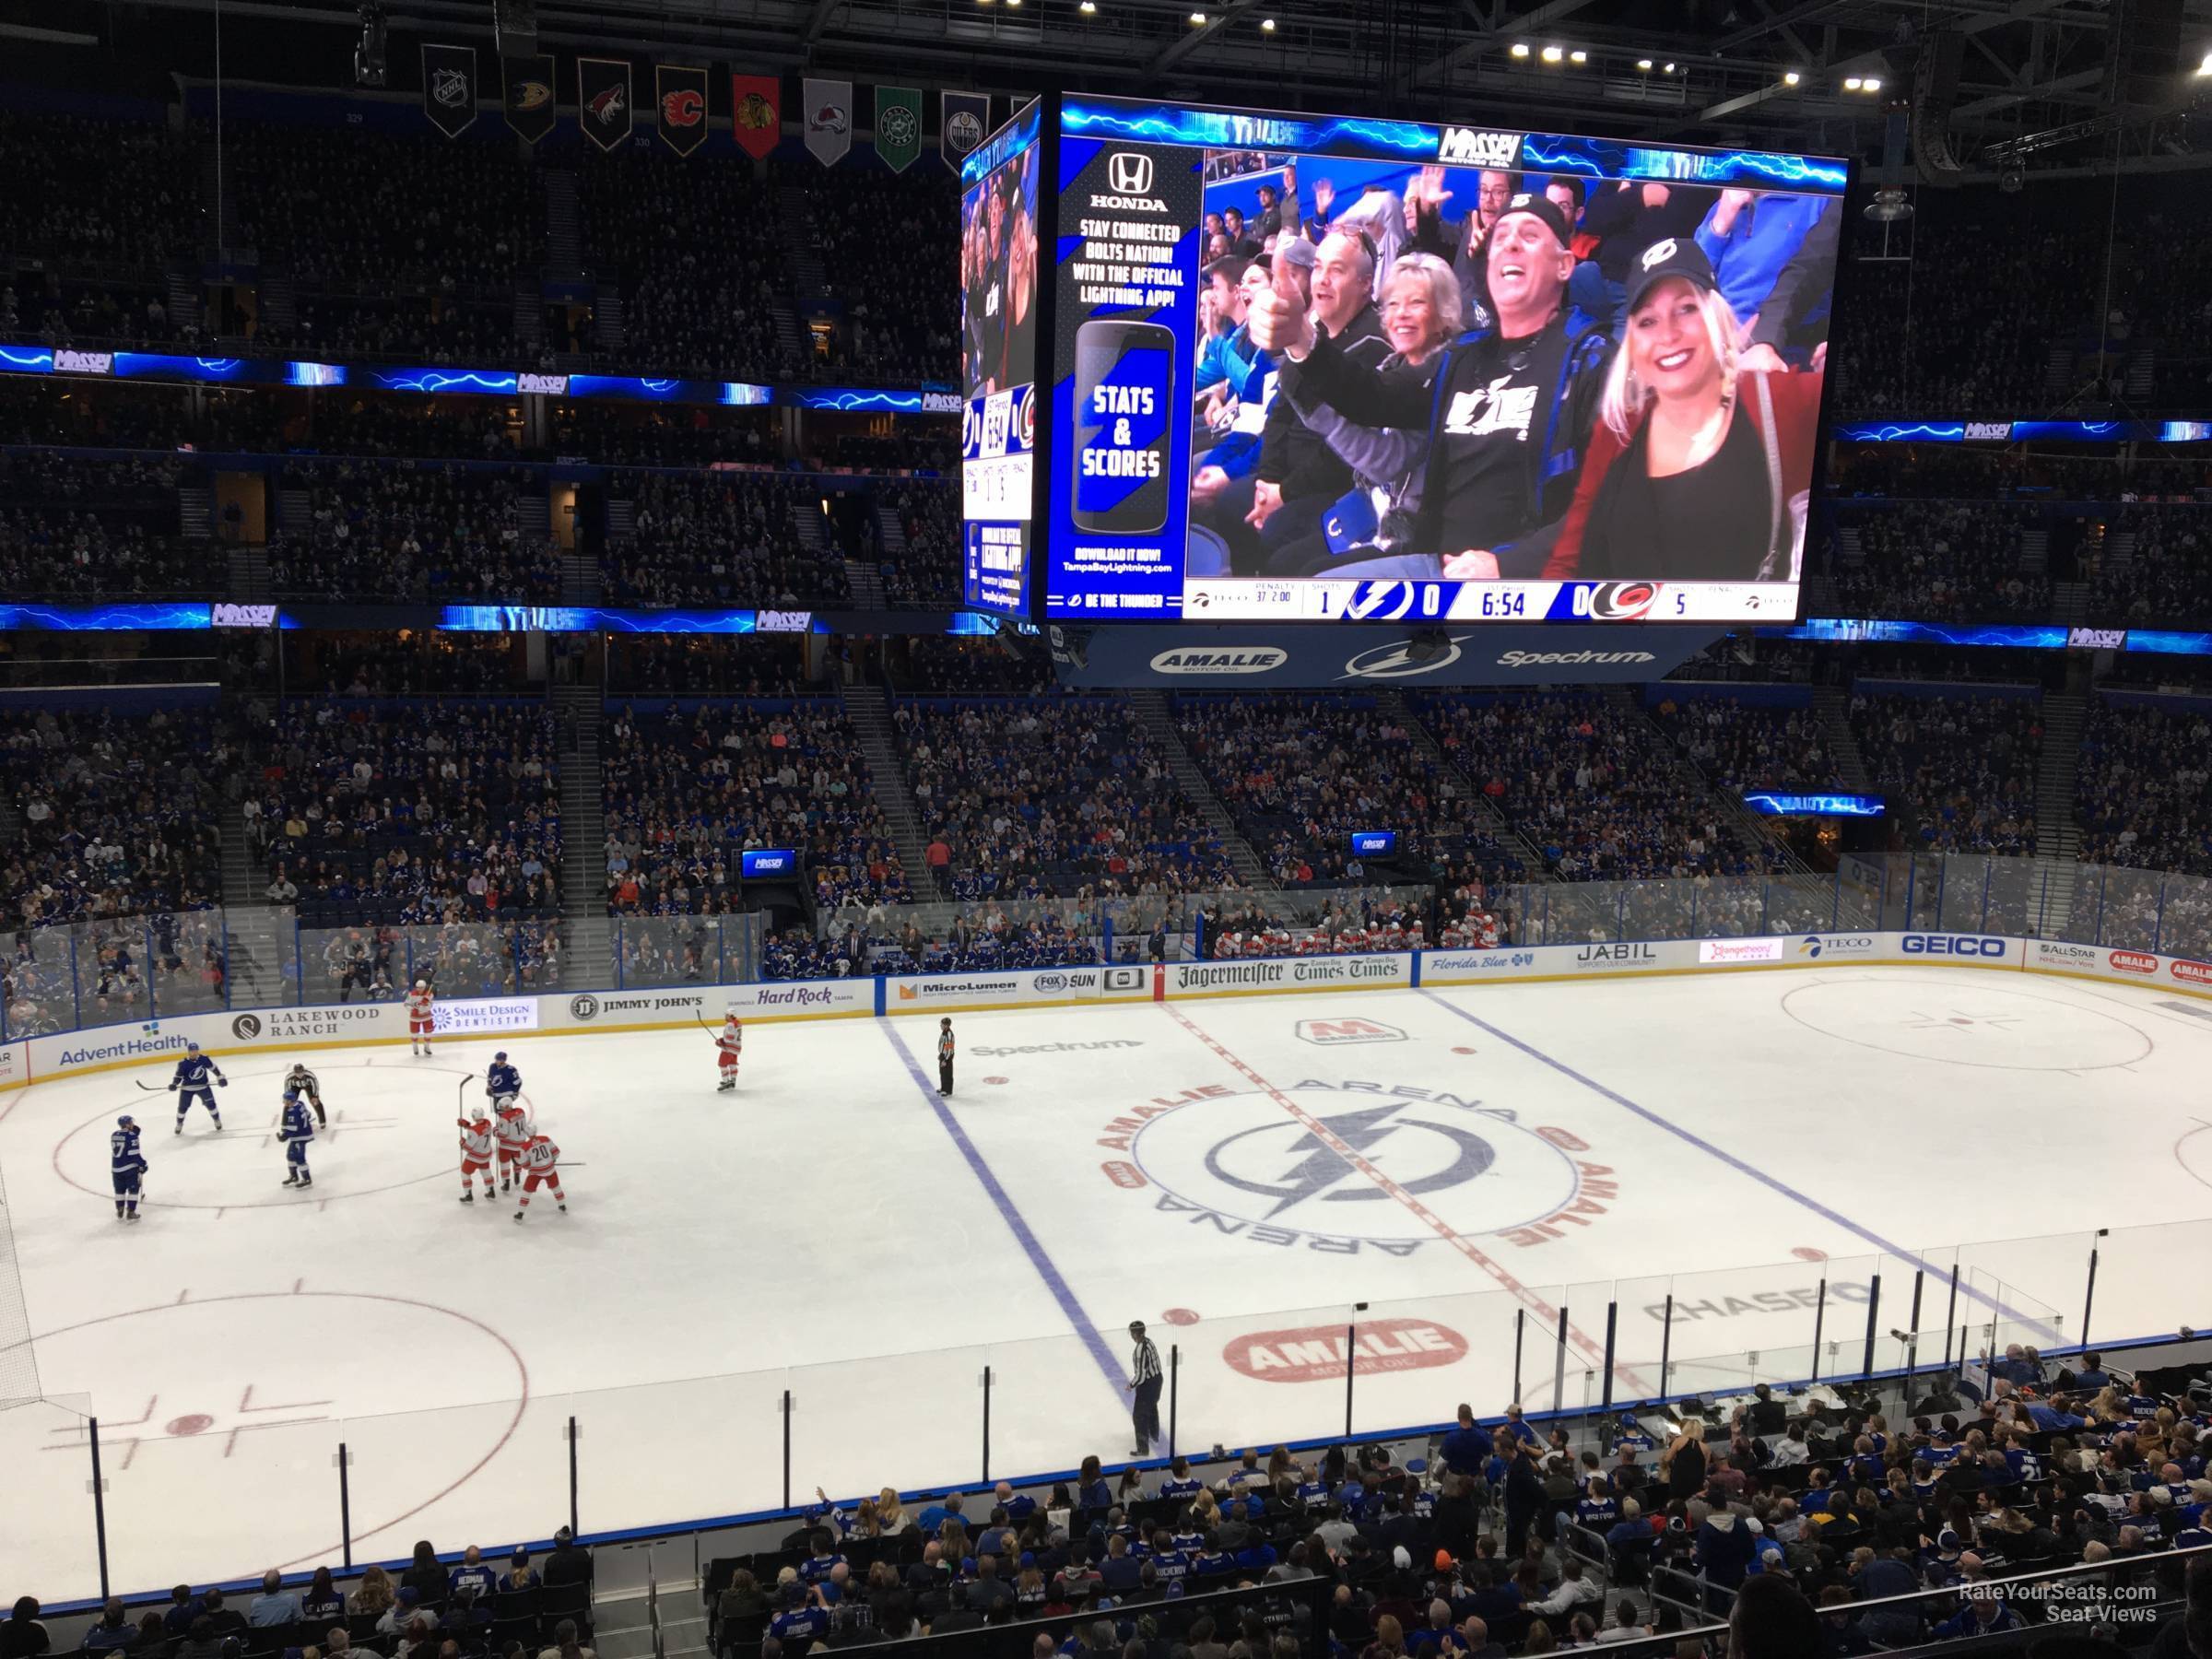 section 218, row d seat view  for hockey - amalie arena